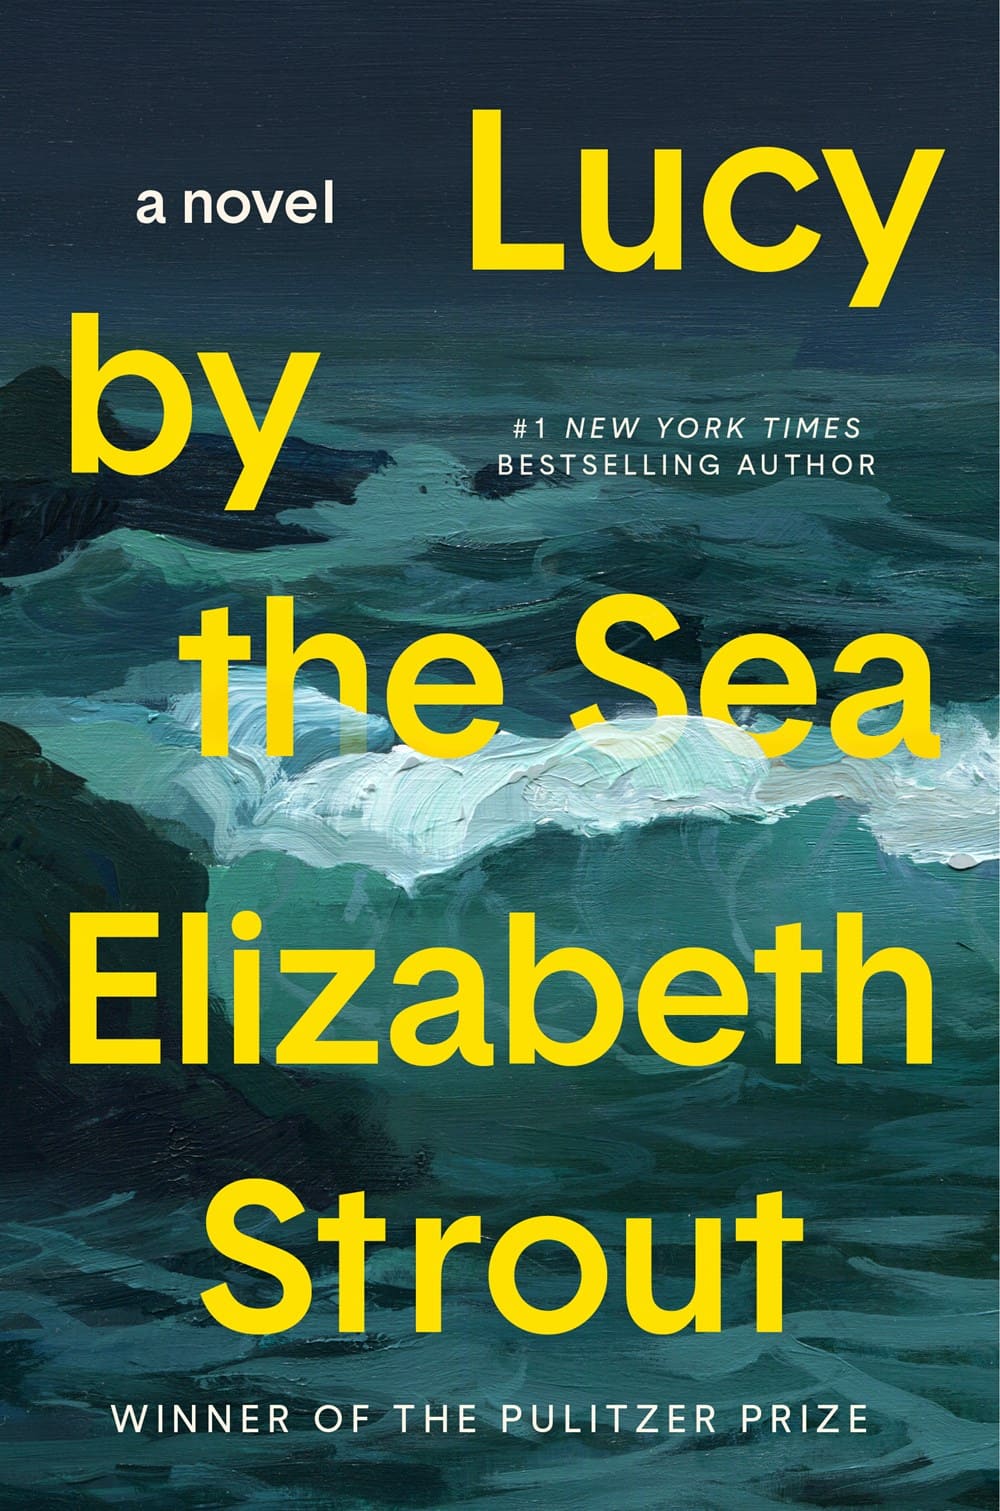 Book cover of Lucy by the sea novel